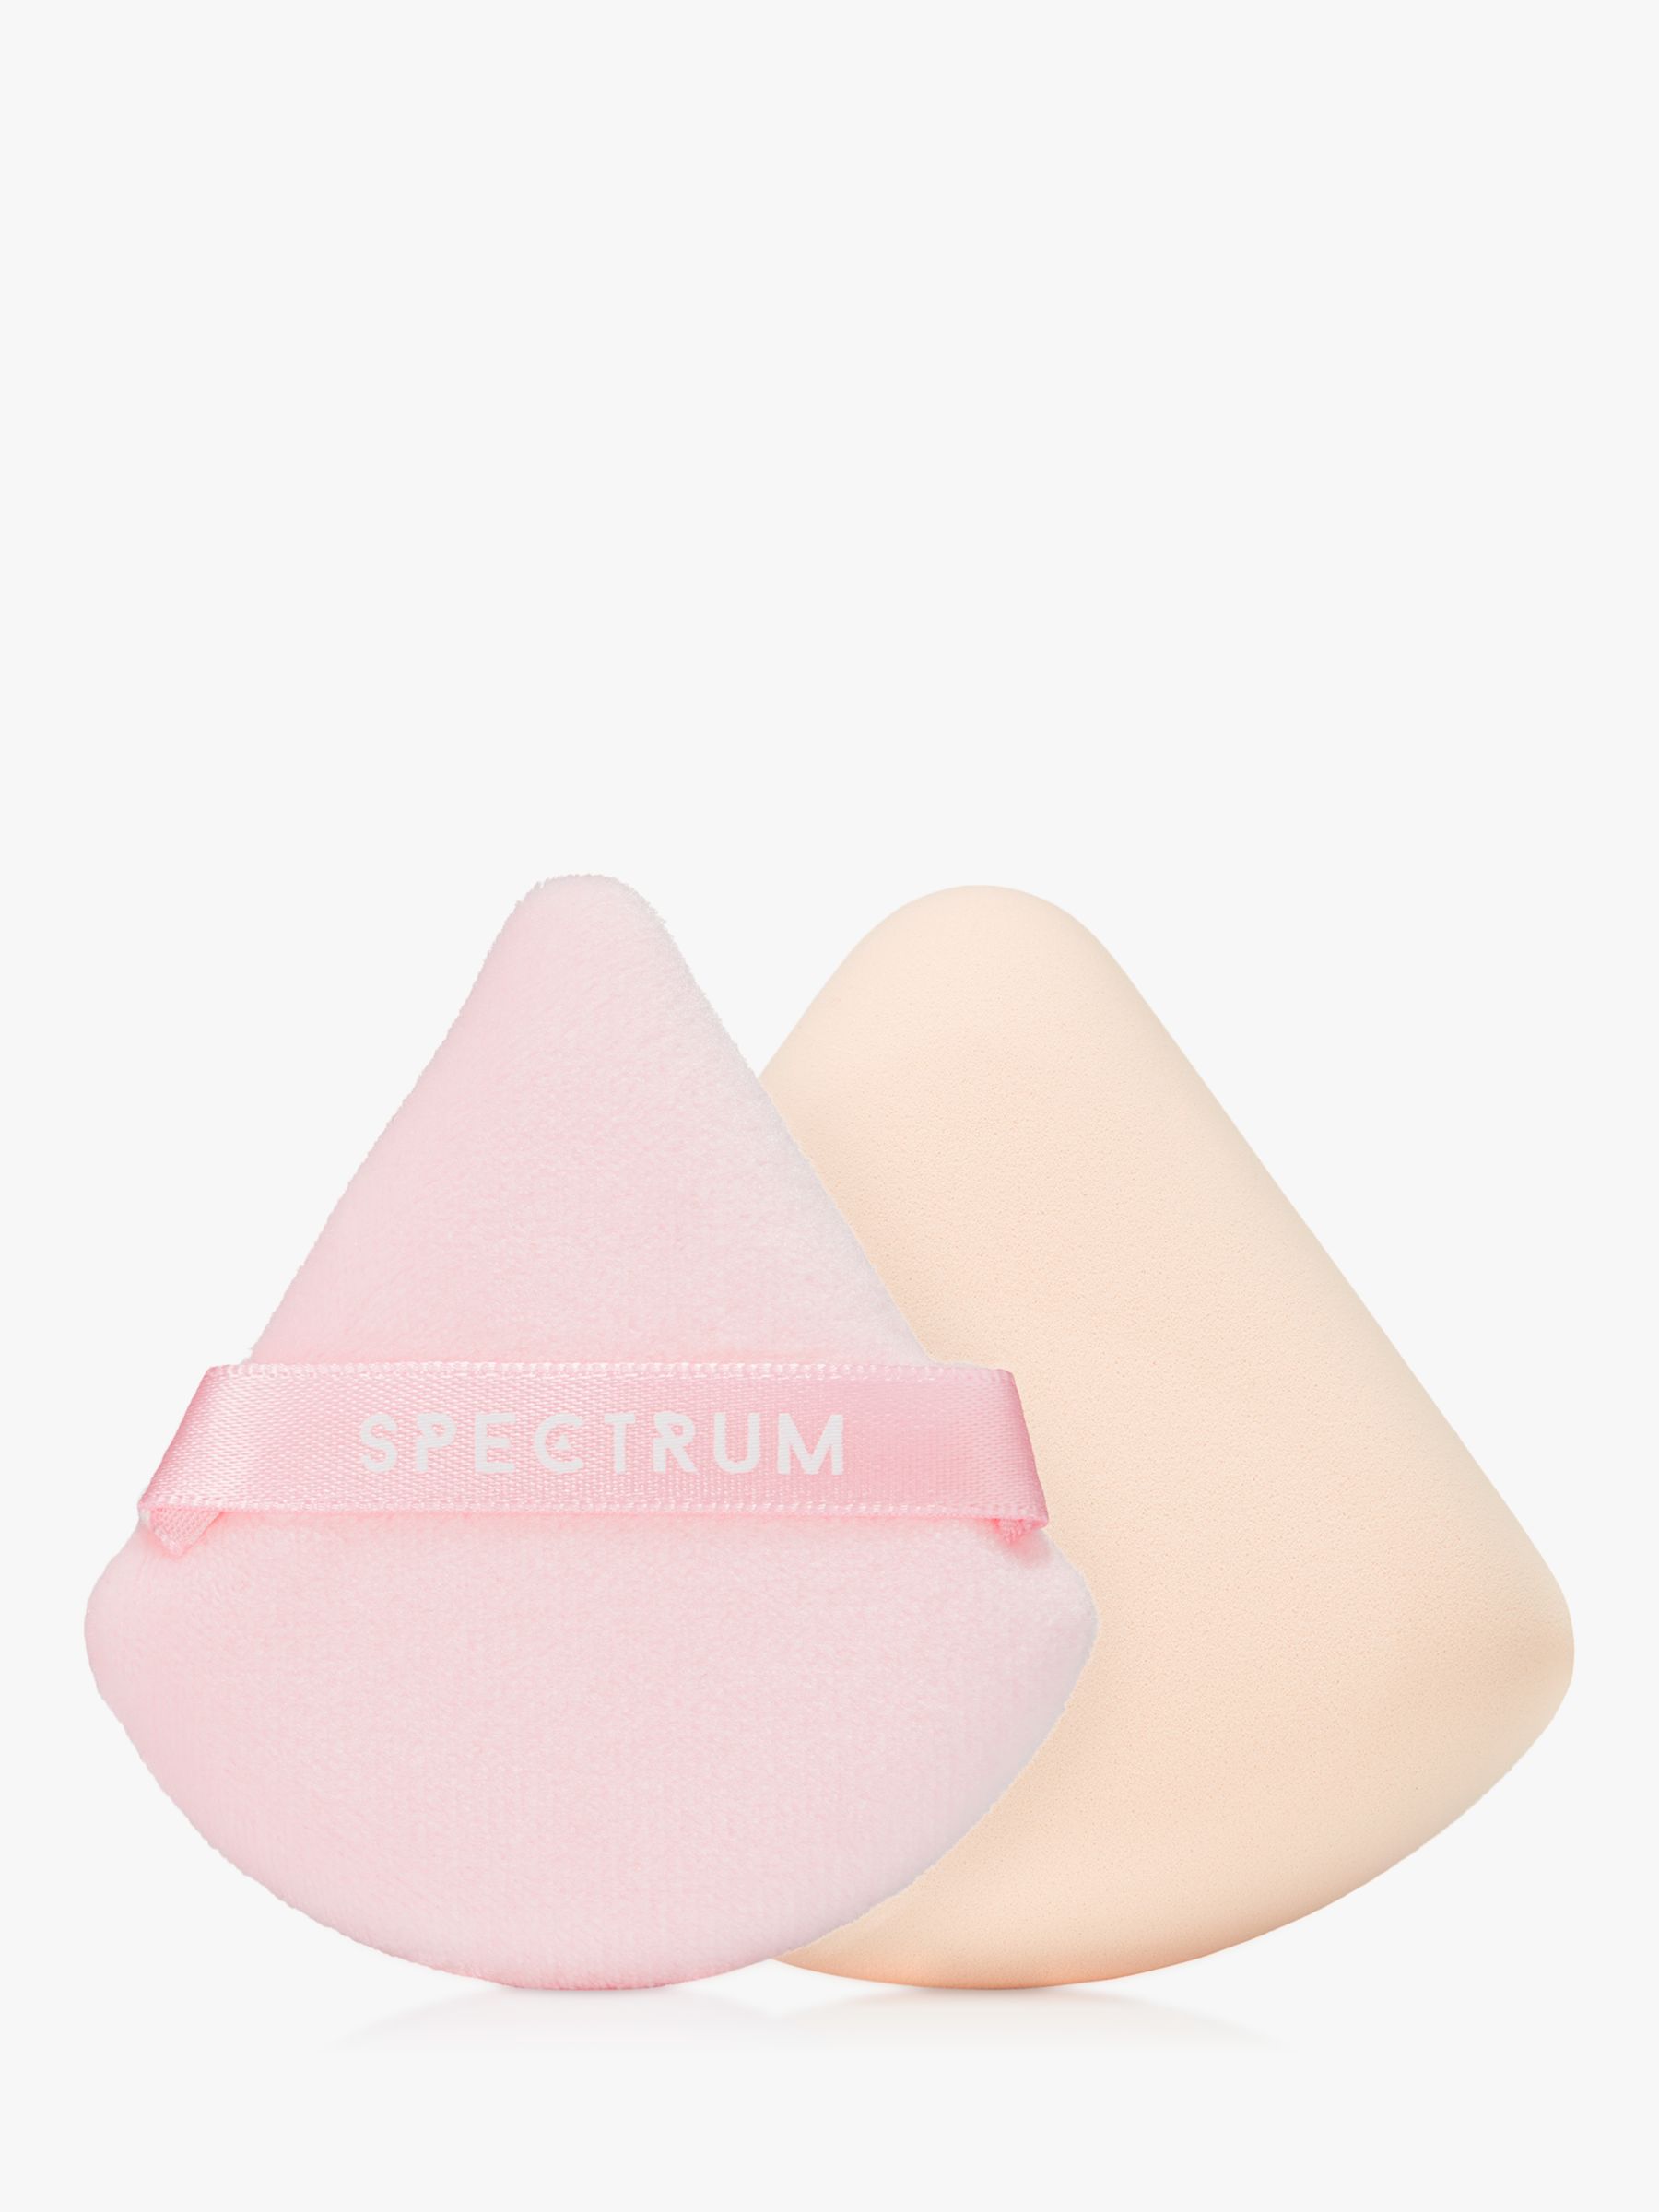 Spectrum Pink Velour and Marble Rubycell Puff Duo, Multi